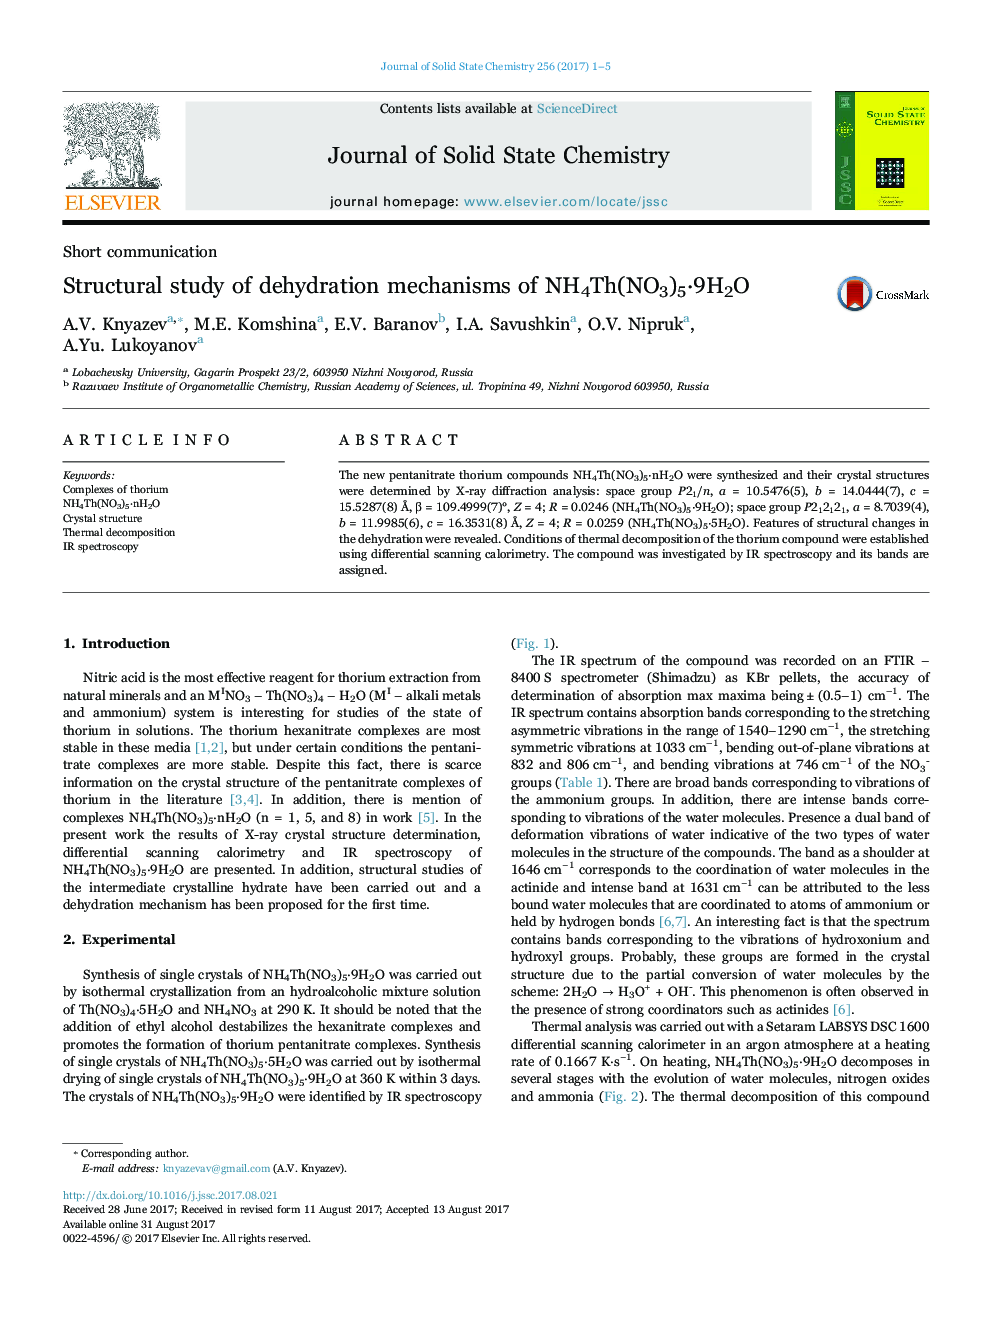 Structural study of dehydration mechanisms of NH4Th(NO3)5Â·9H2O